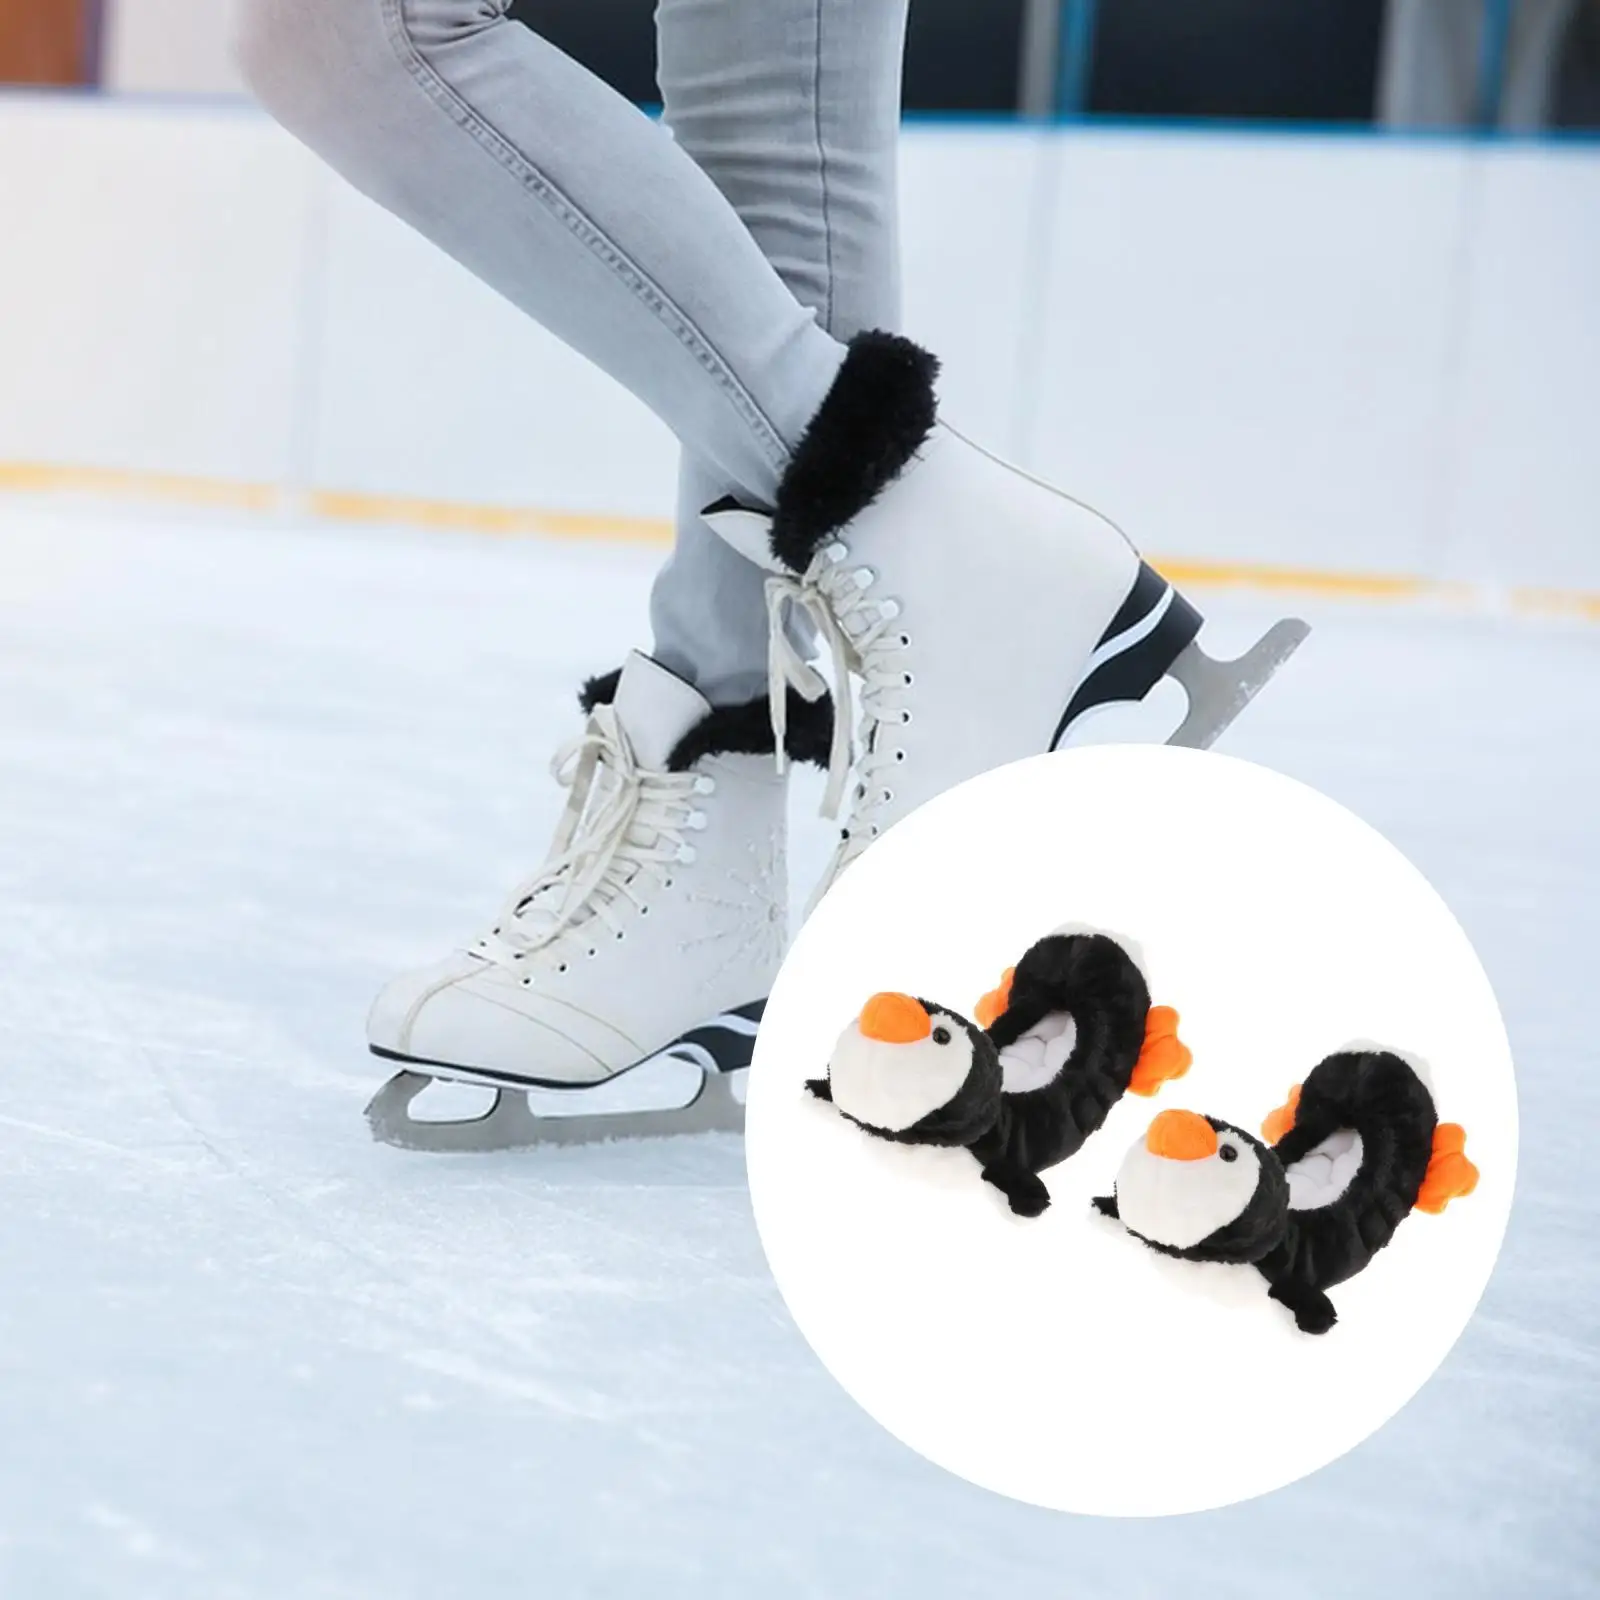 Ice Skate Blade Covers Protect Sleeve Portable Skate Covers for Walking Hockey Skates Training Figure Skates Accessories